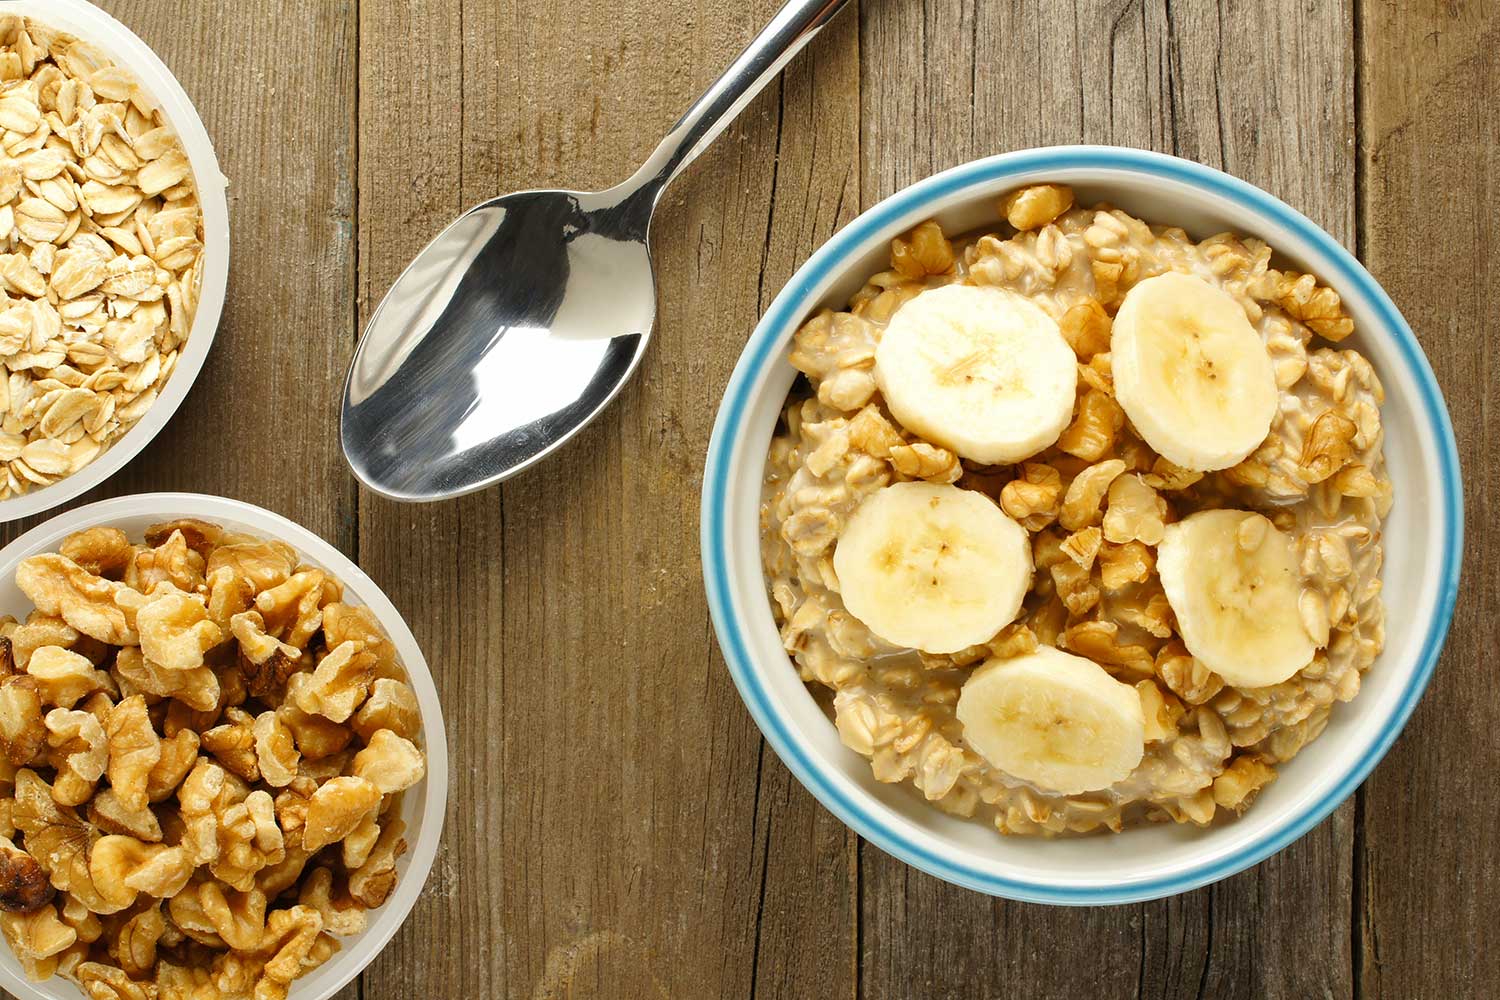 Several bowls filled with granola and banana sit on a wooden table next to a spoon 